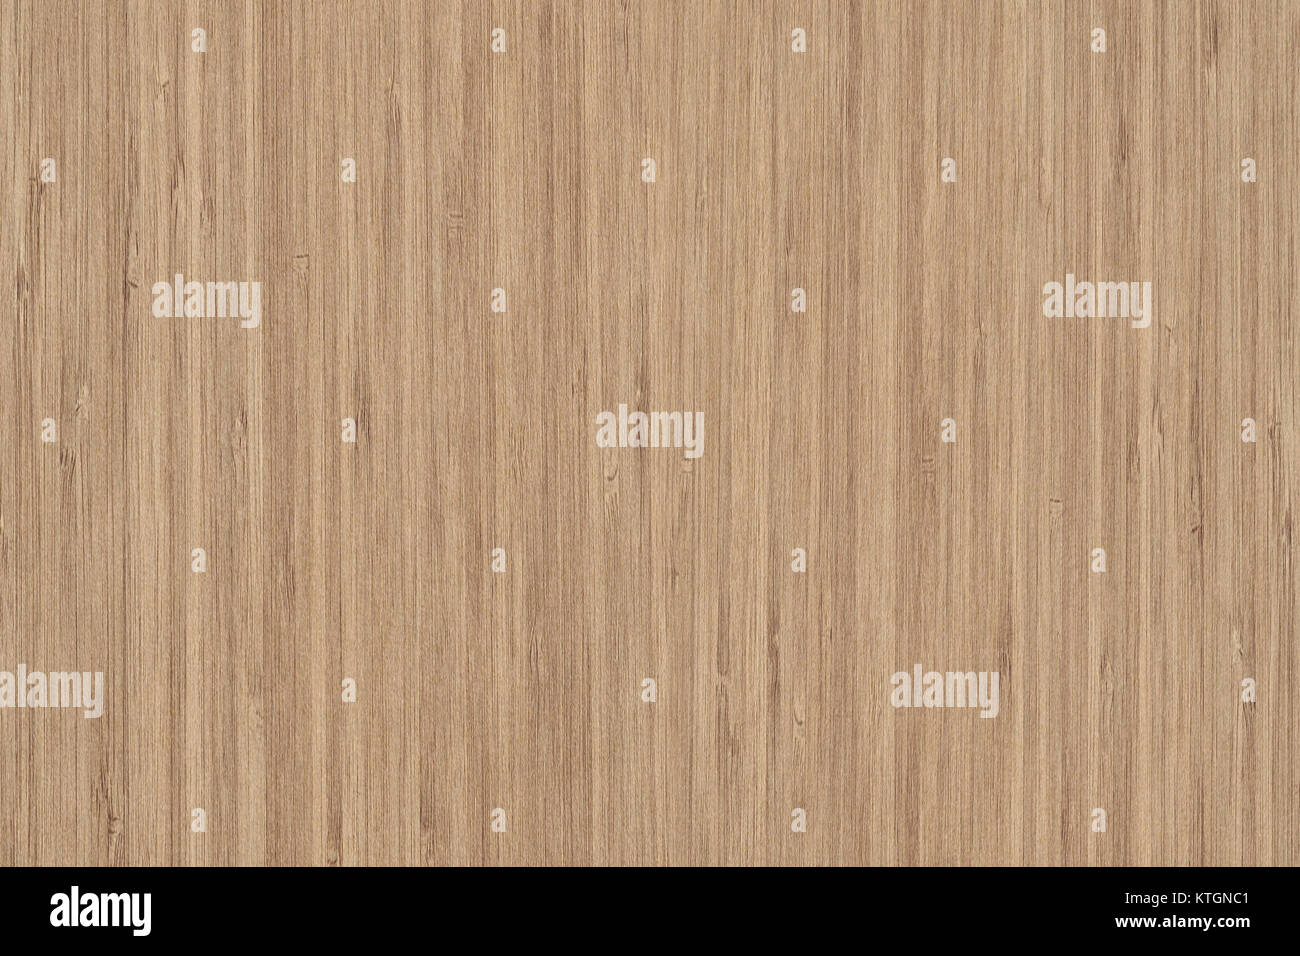 brown grunge wooden texture to use as background, wood texture with natural light pattern Stock Photo